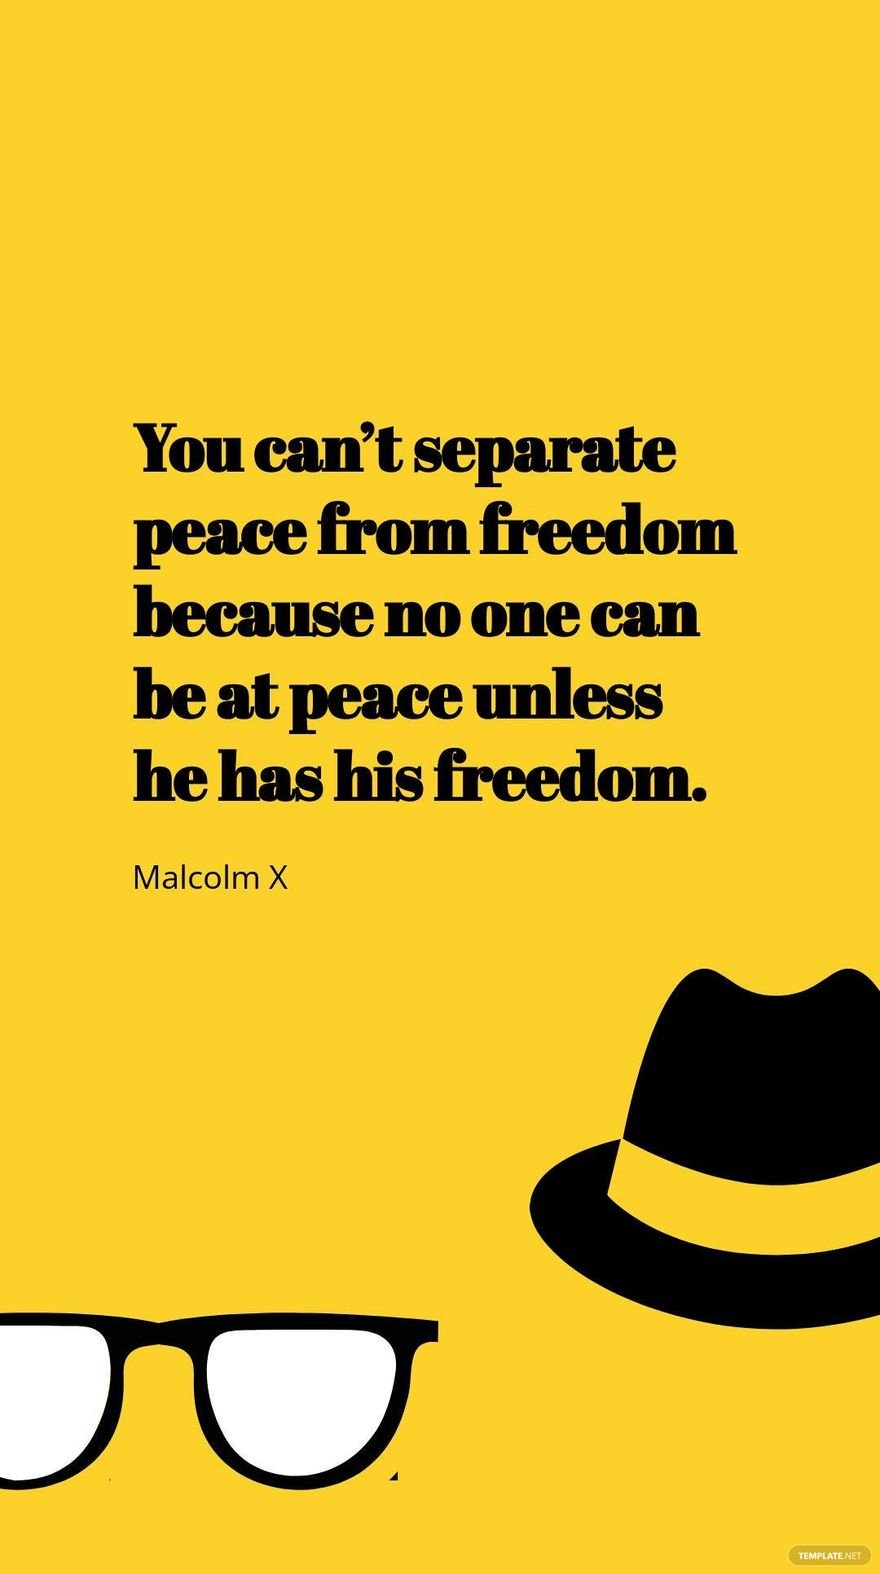 Free Malcolm X - You can’t separate peace from freedom because no one can be at peace unless he has his freedom. in JPG